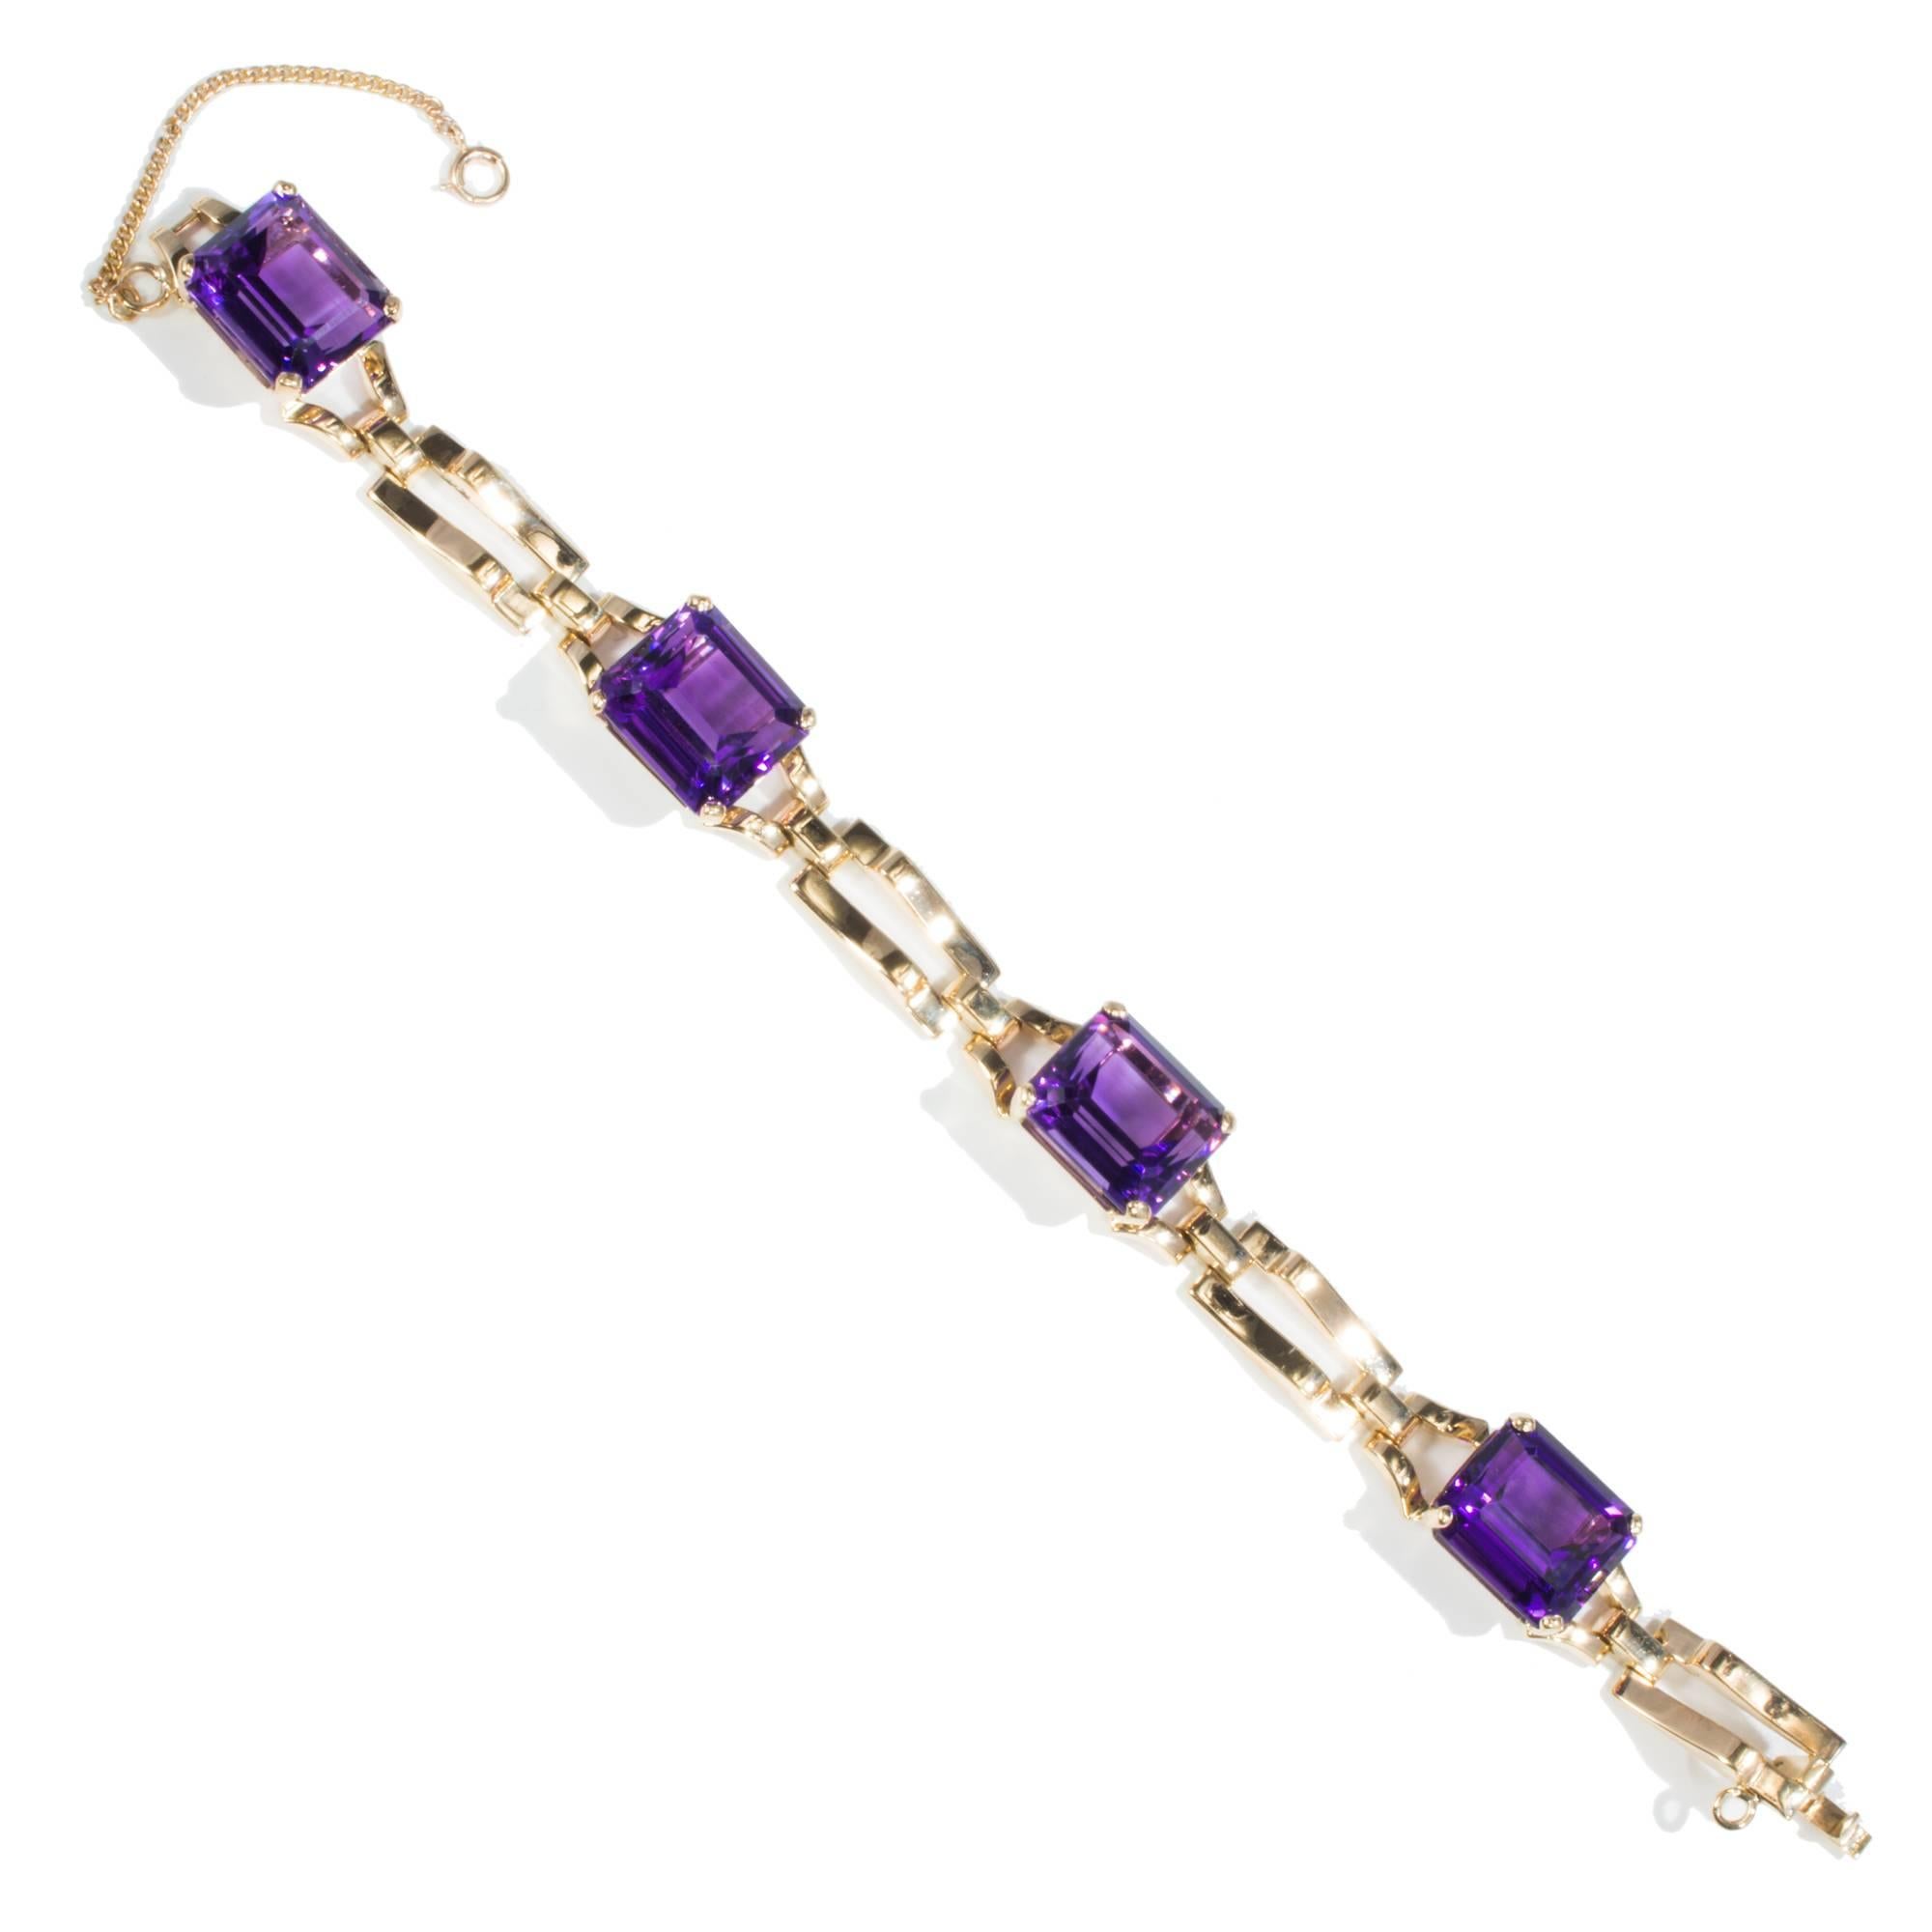 1950s Tiffany & Co 4 Emerald cut genuine natural amethyst 14k rose gold bracelet. Built in catch and added safety chain.

4 Emerald cut bright gem purple Amethyst, approx. total weight 40.47cts, VS, 14.25 x 12.2mm
14k rose gold
Tested and stamped: